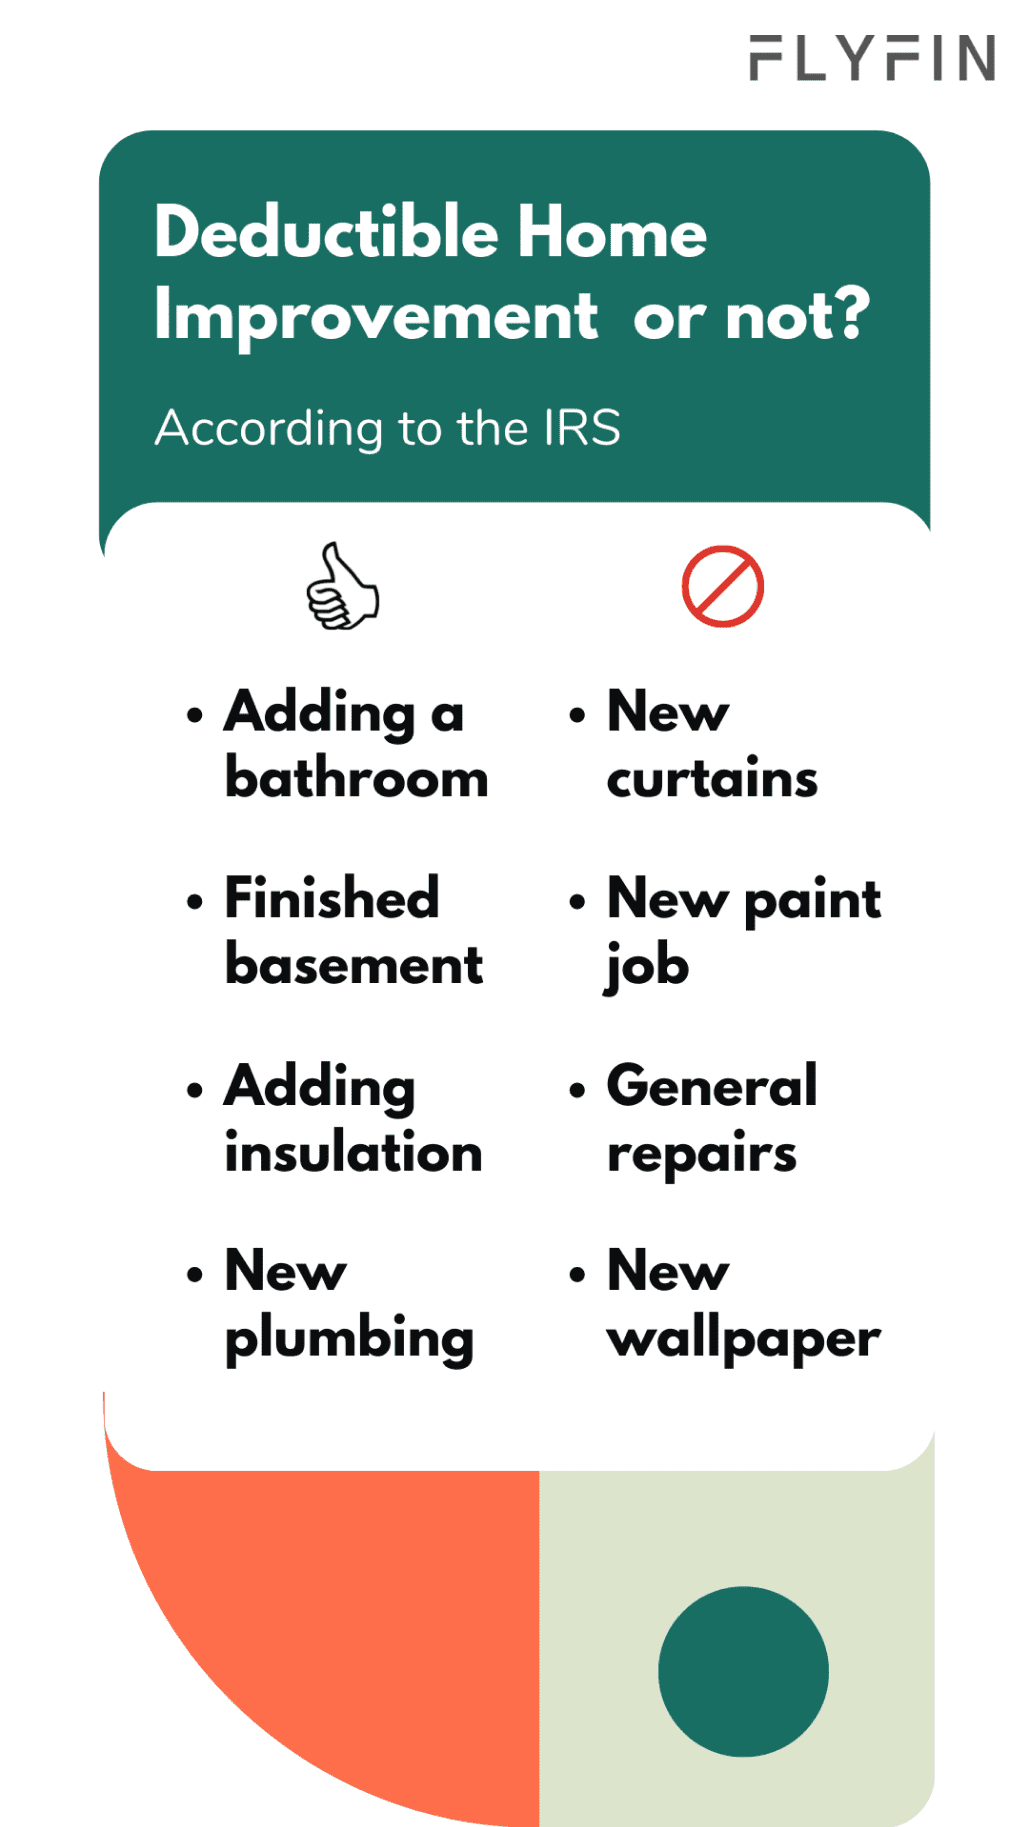 Image with text listing home improvement projects that may be tax deductible according to the IRS, including adding a bathroom, finished basement, insulation, plumbing, paint job, and general repairs. No mention of self-employment, 1099, freelancer, or taxes.